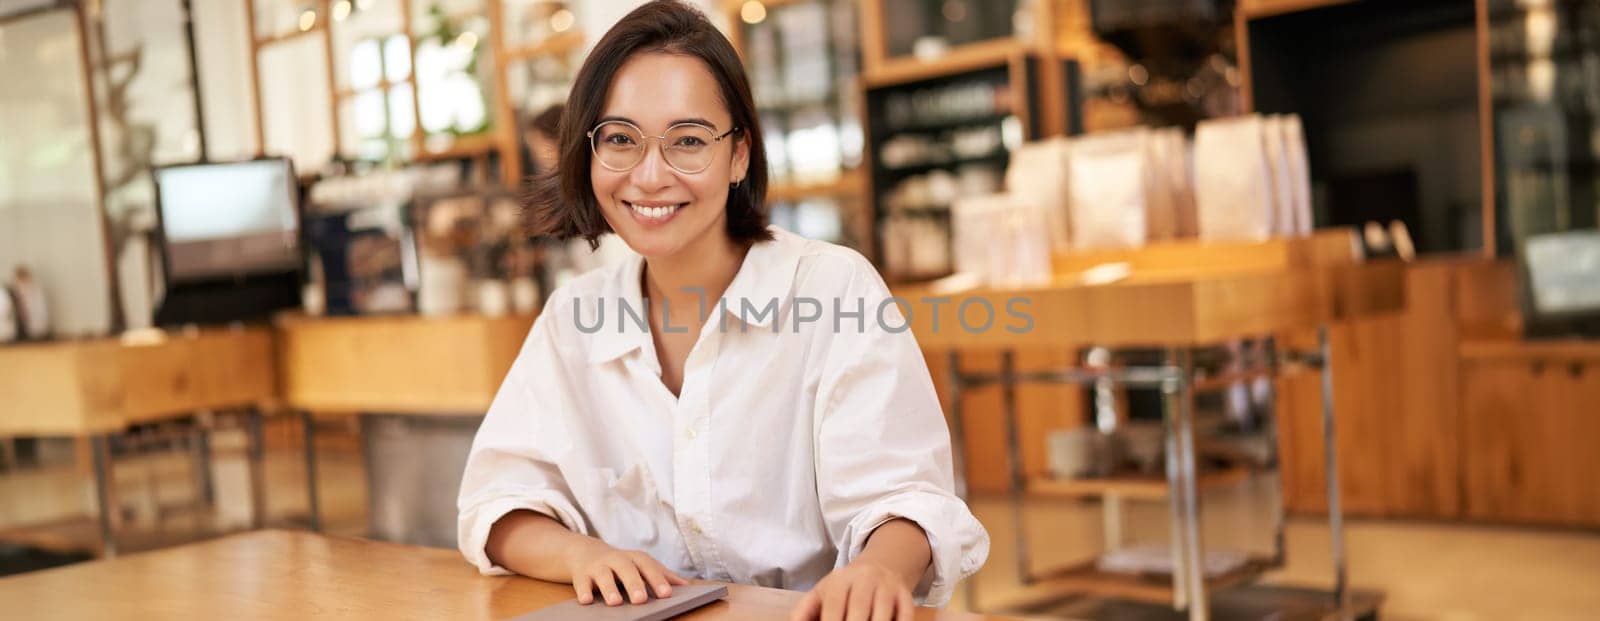 Young stylish asian woman, business owner in glasses, sitting in cafe with notebook, smiling at camera. People and lifestyle concept